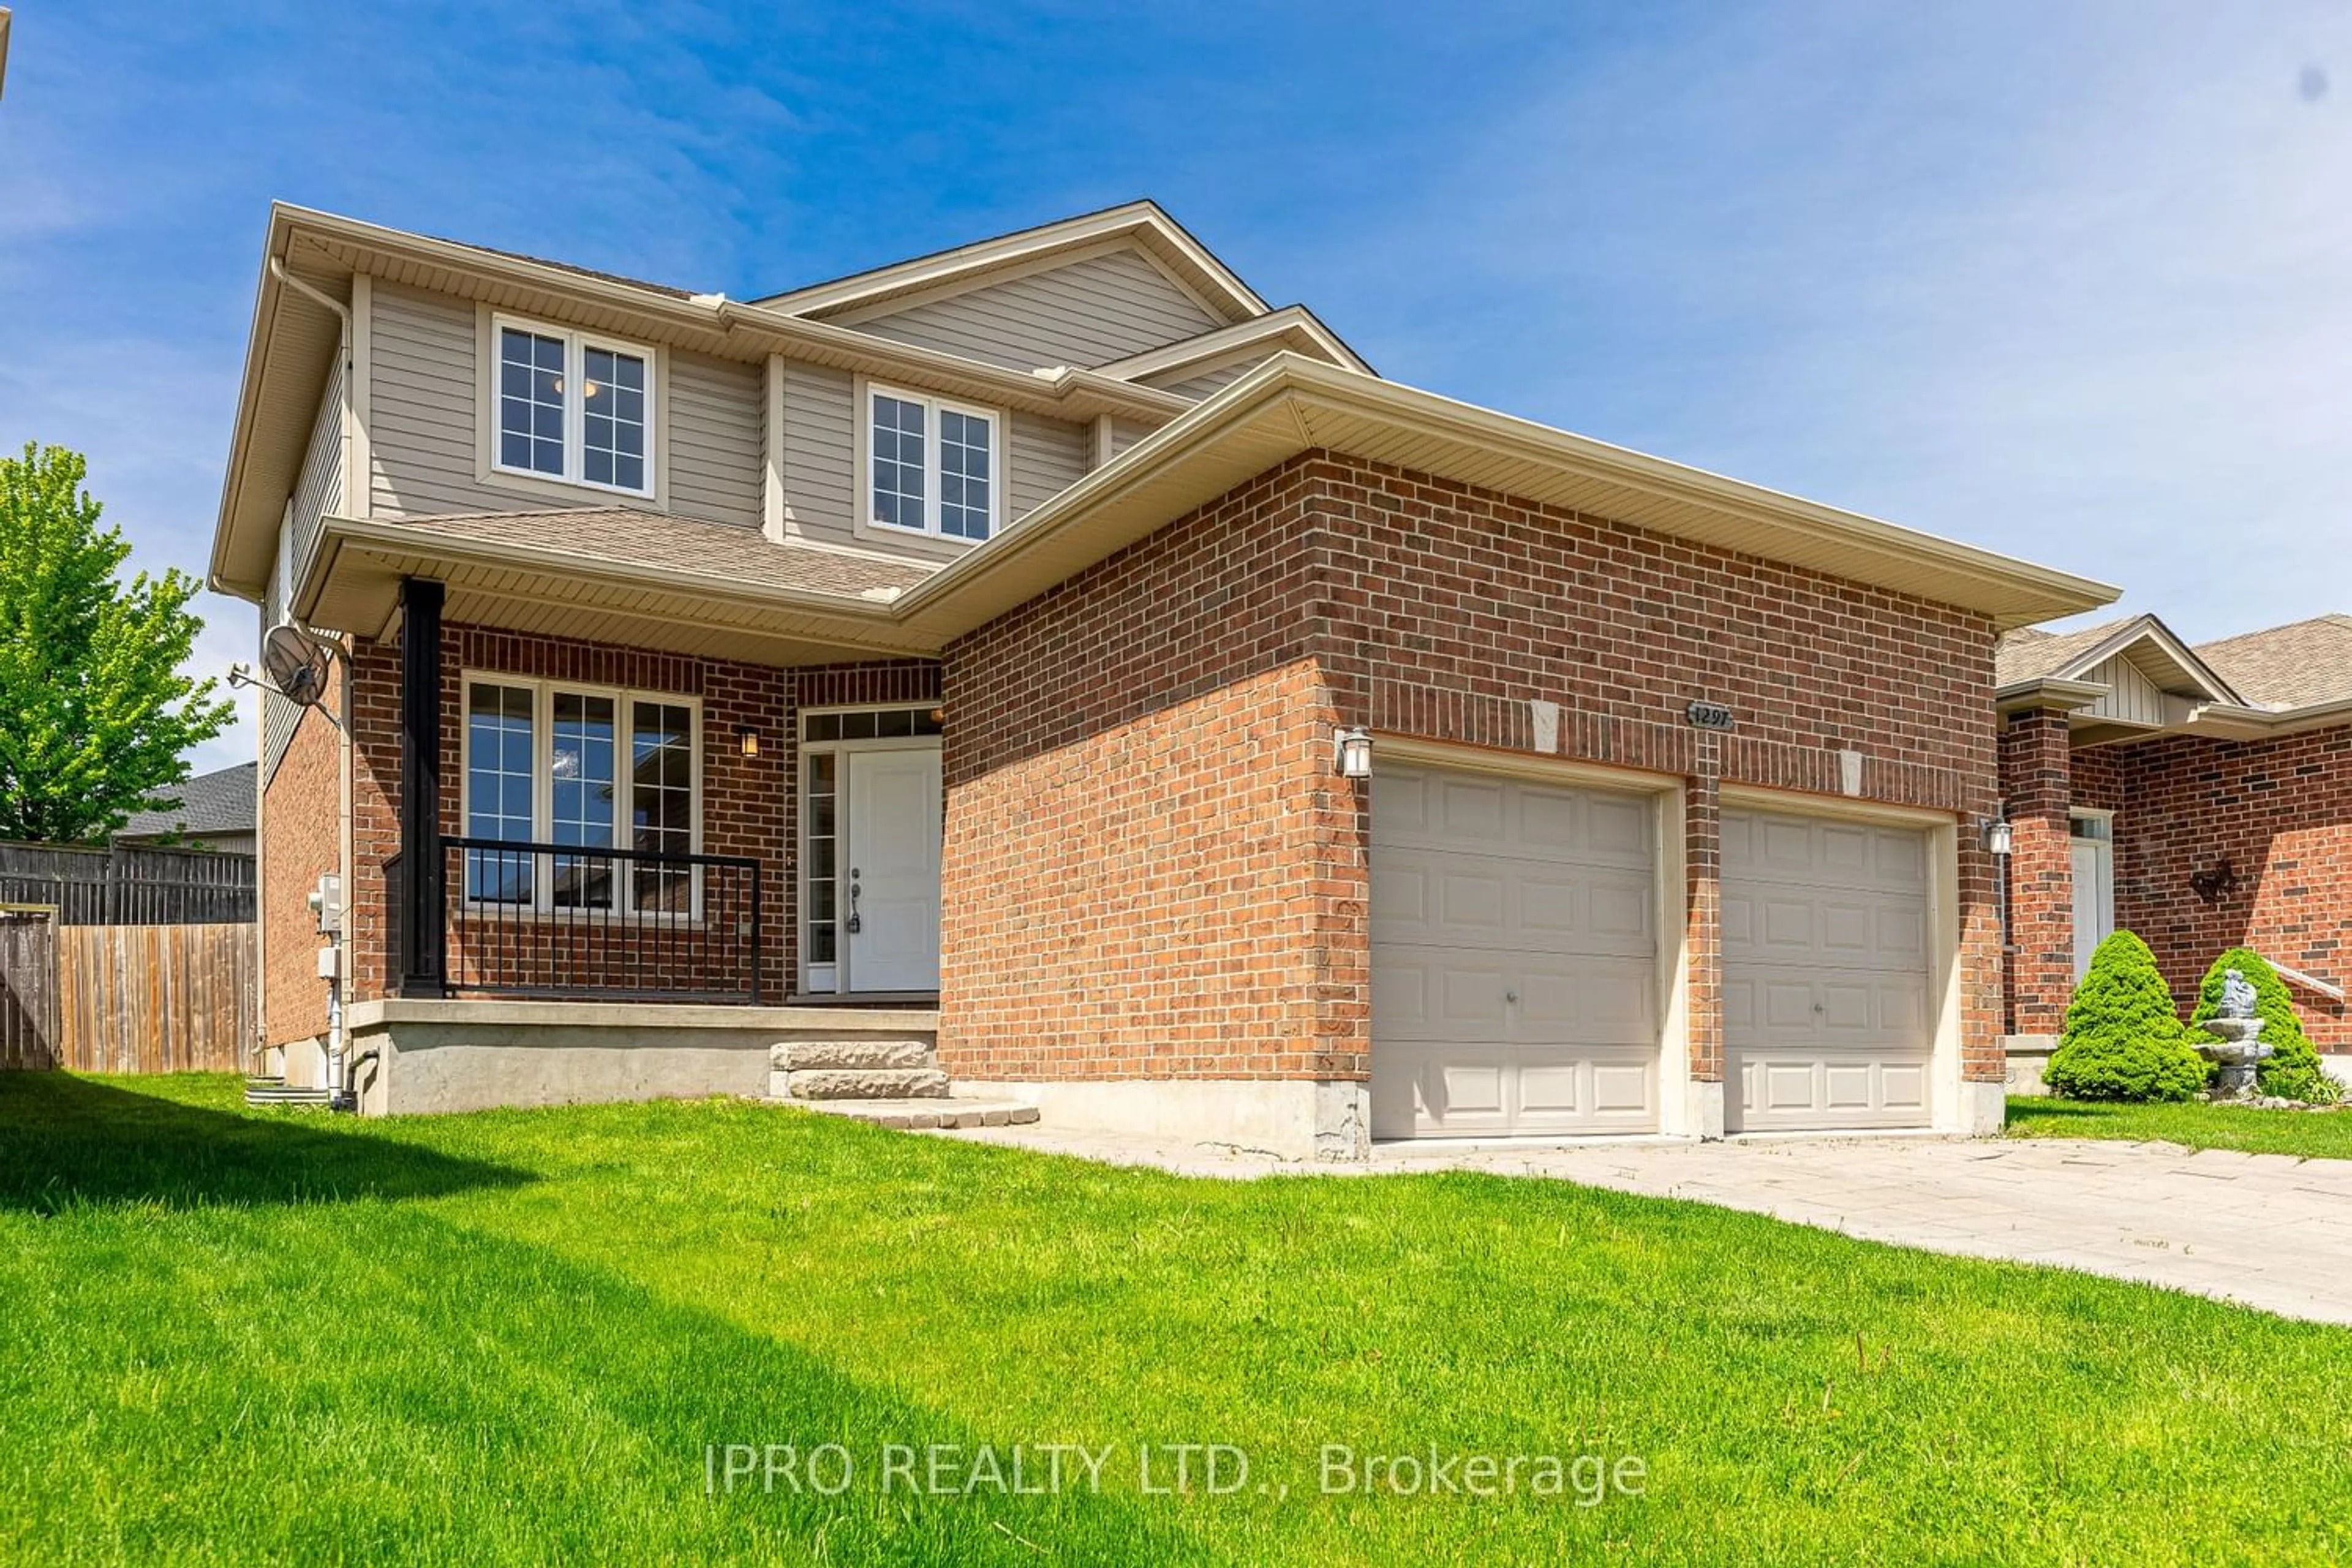 Home with brick exterior material for 1297 Whetherfield St, London Ontario N6H 0E5